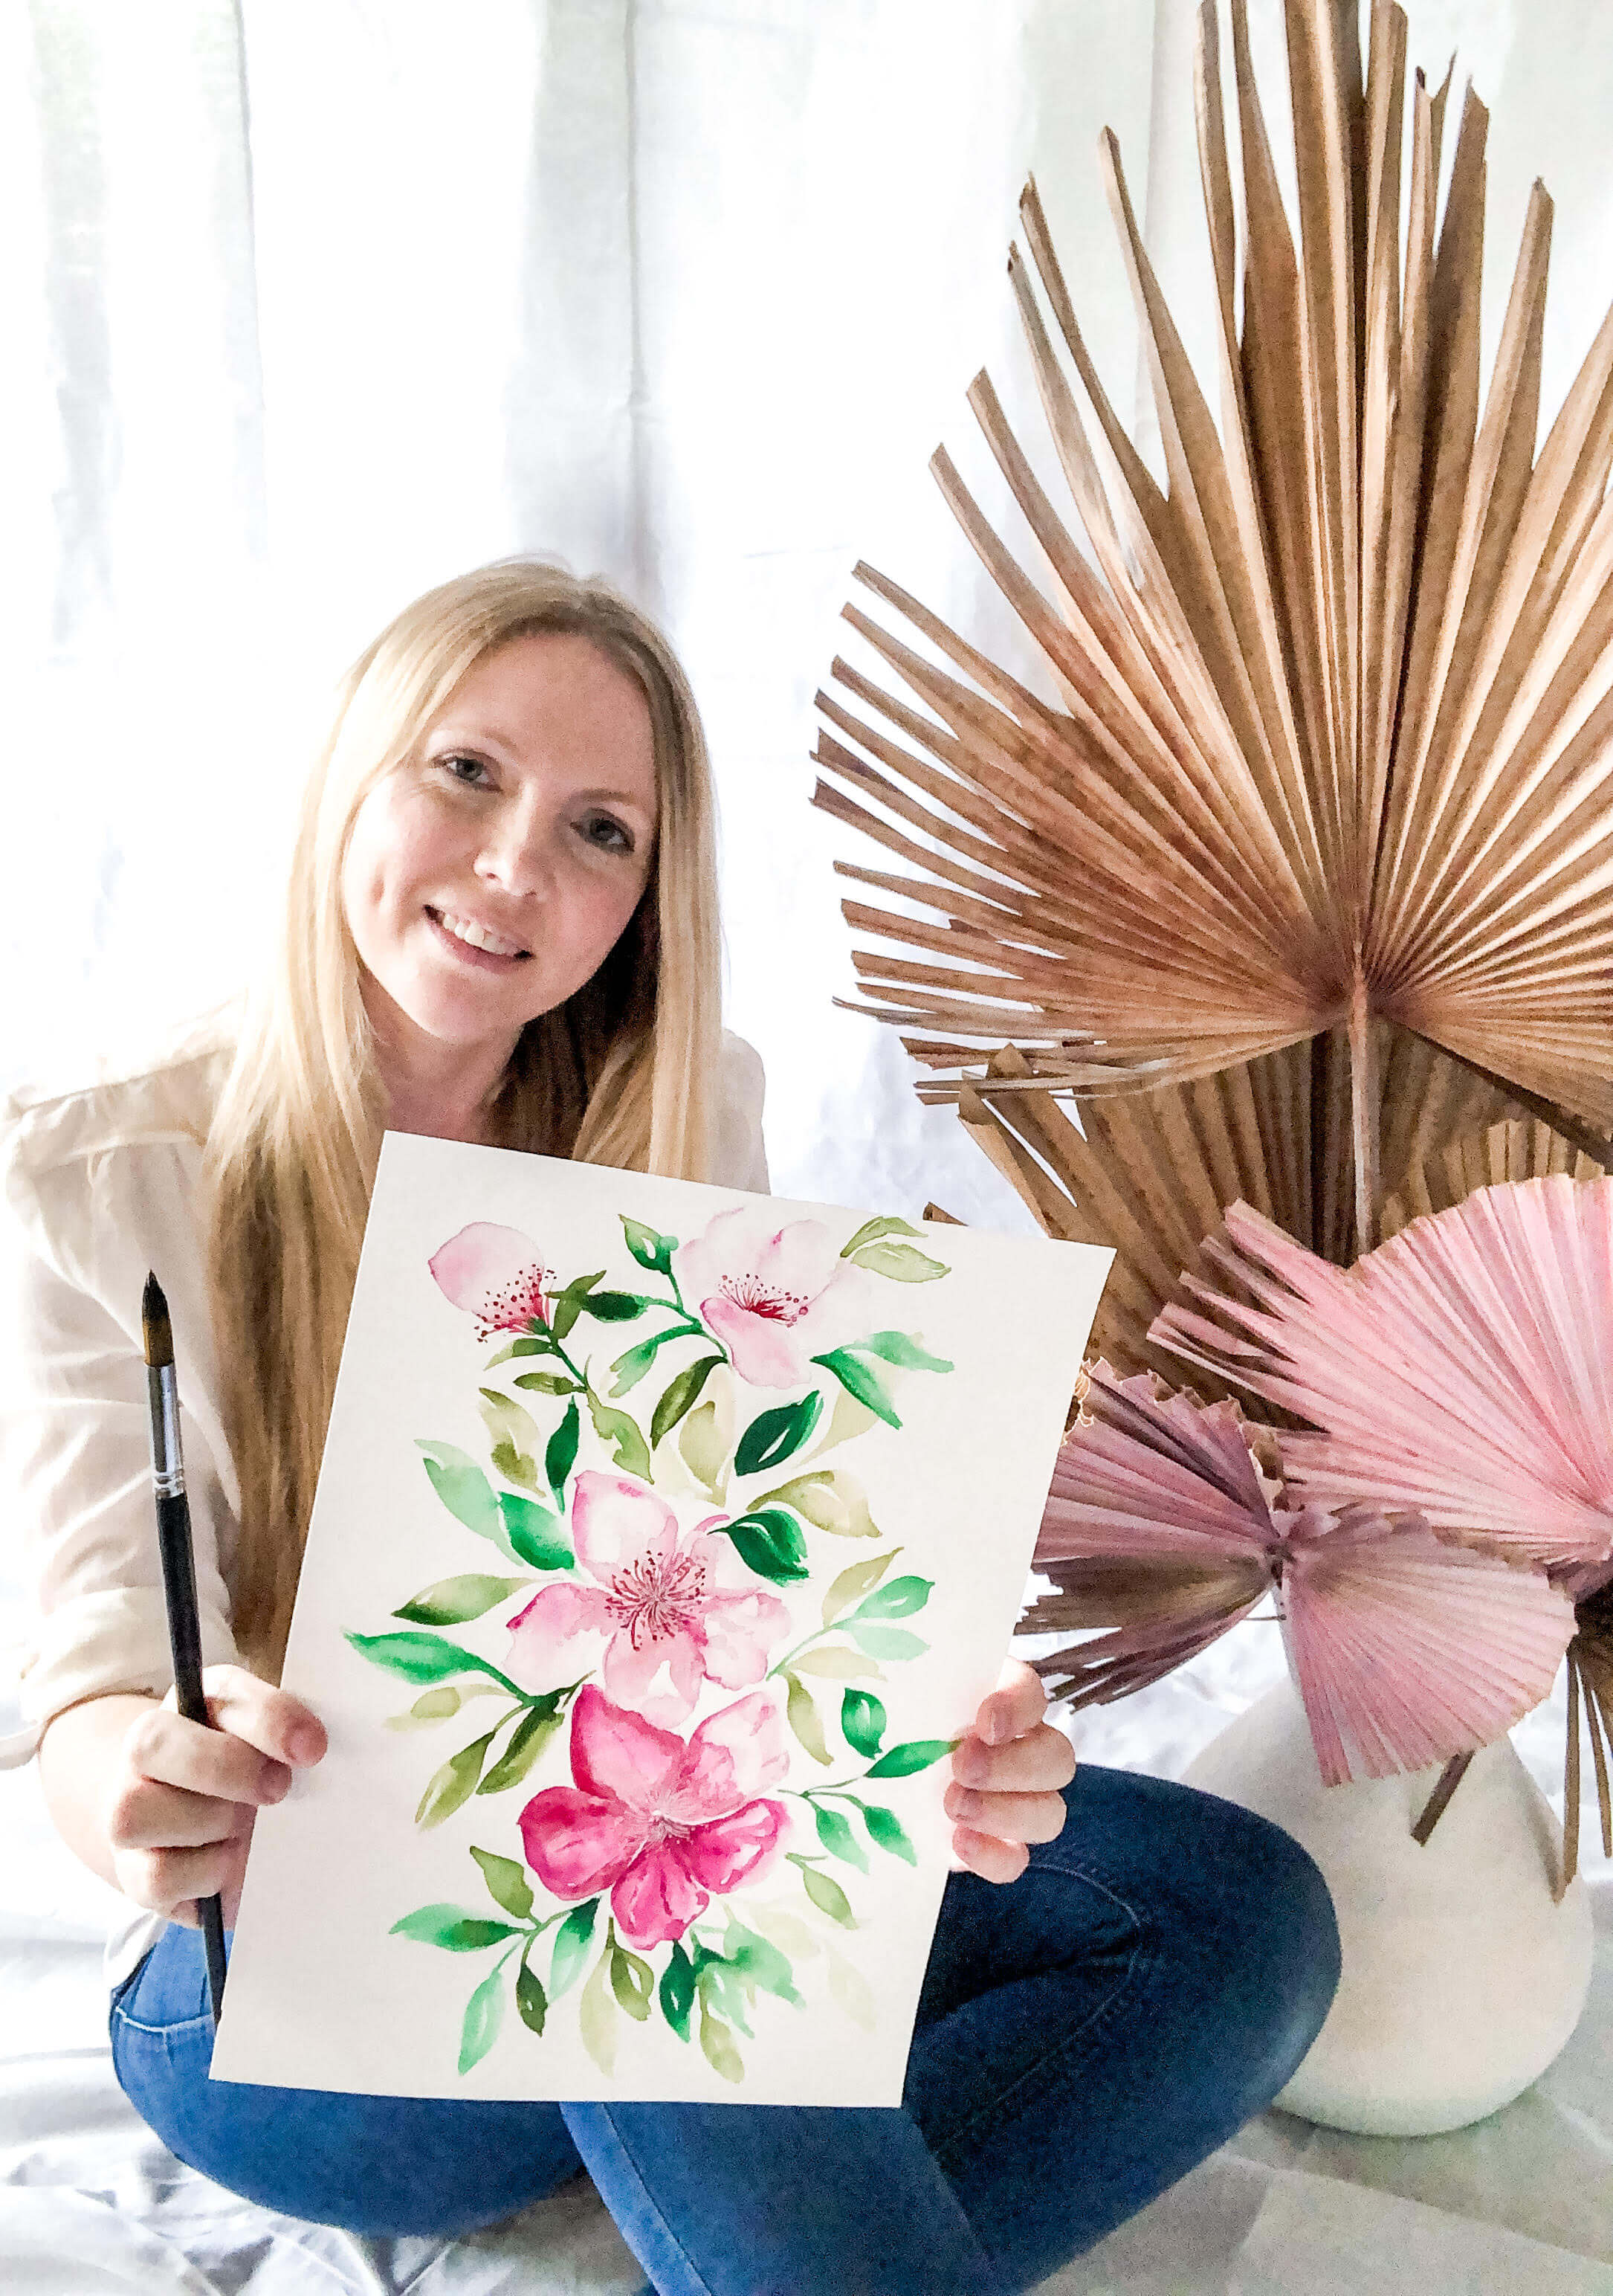 Artist Stacey Bigg holds watercolour painting and watercolour brush and smiles with a dried palm behind her.